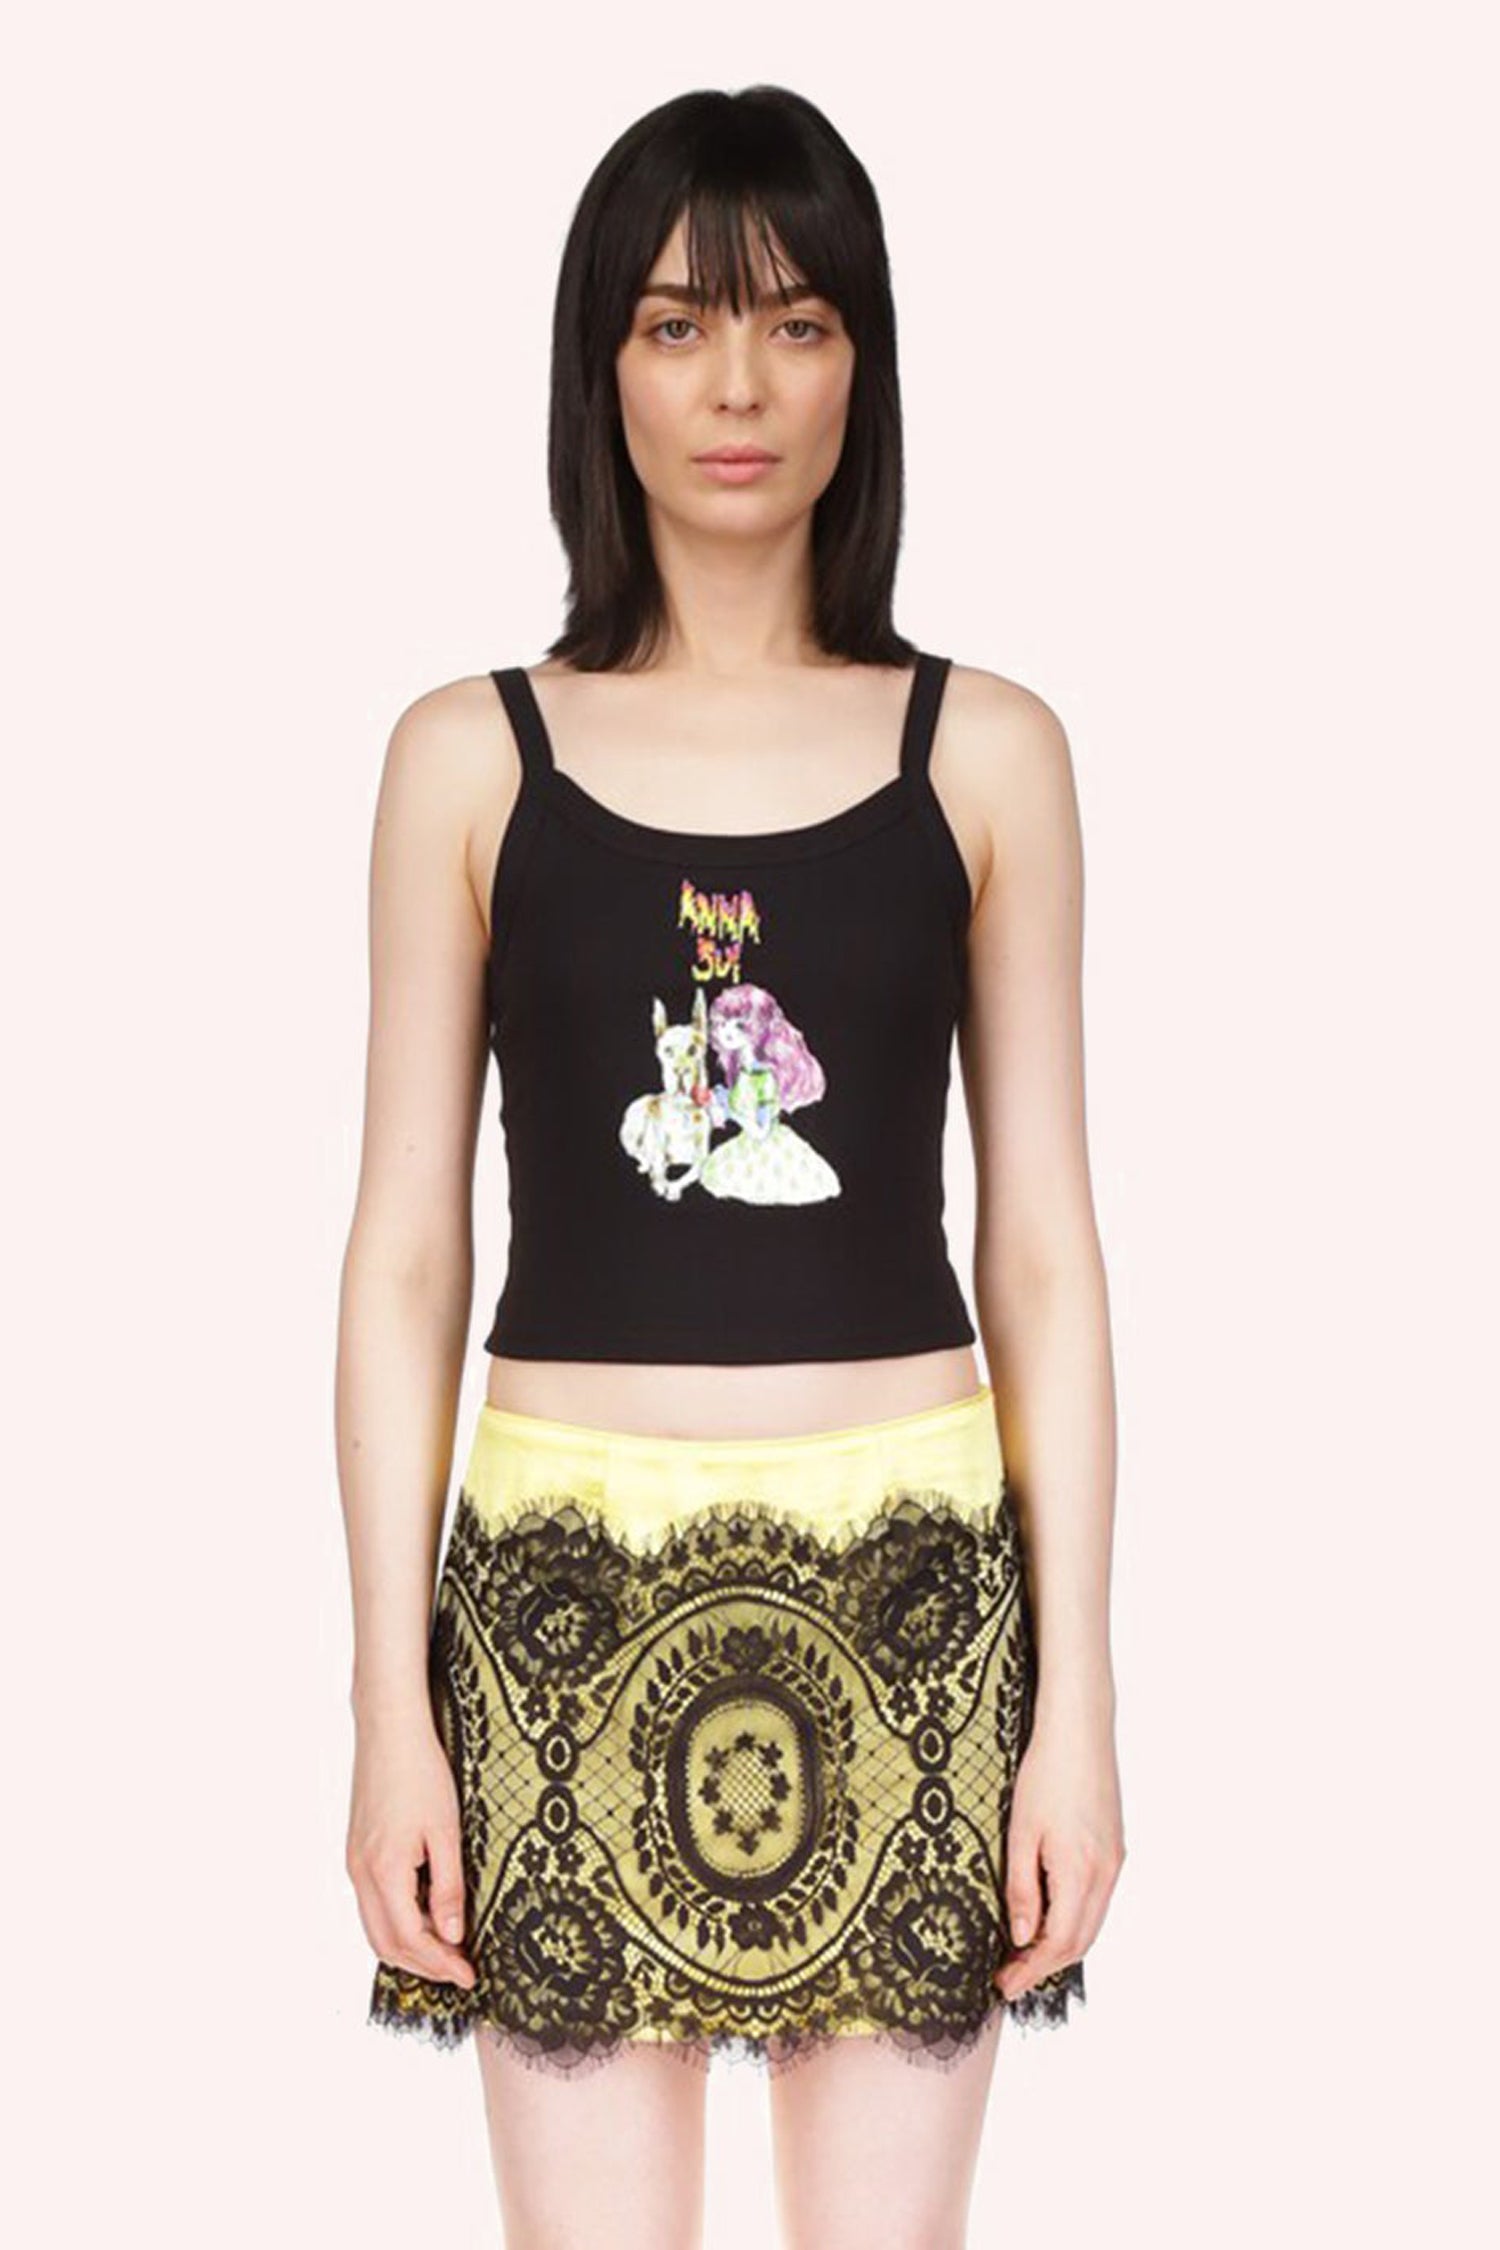 Micro Ribbed Scoop Tank Black, sleeveless,2 black straps, Anna Sui logo above a little girl with a white dog